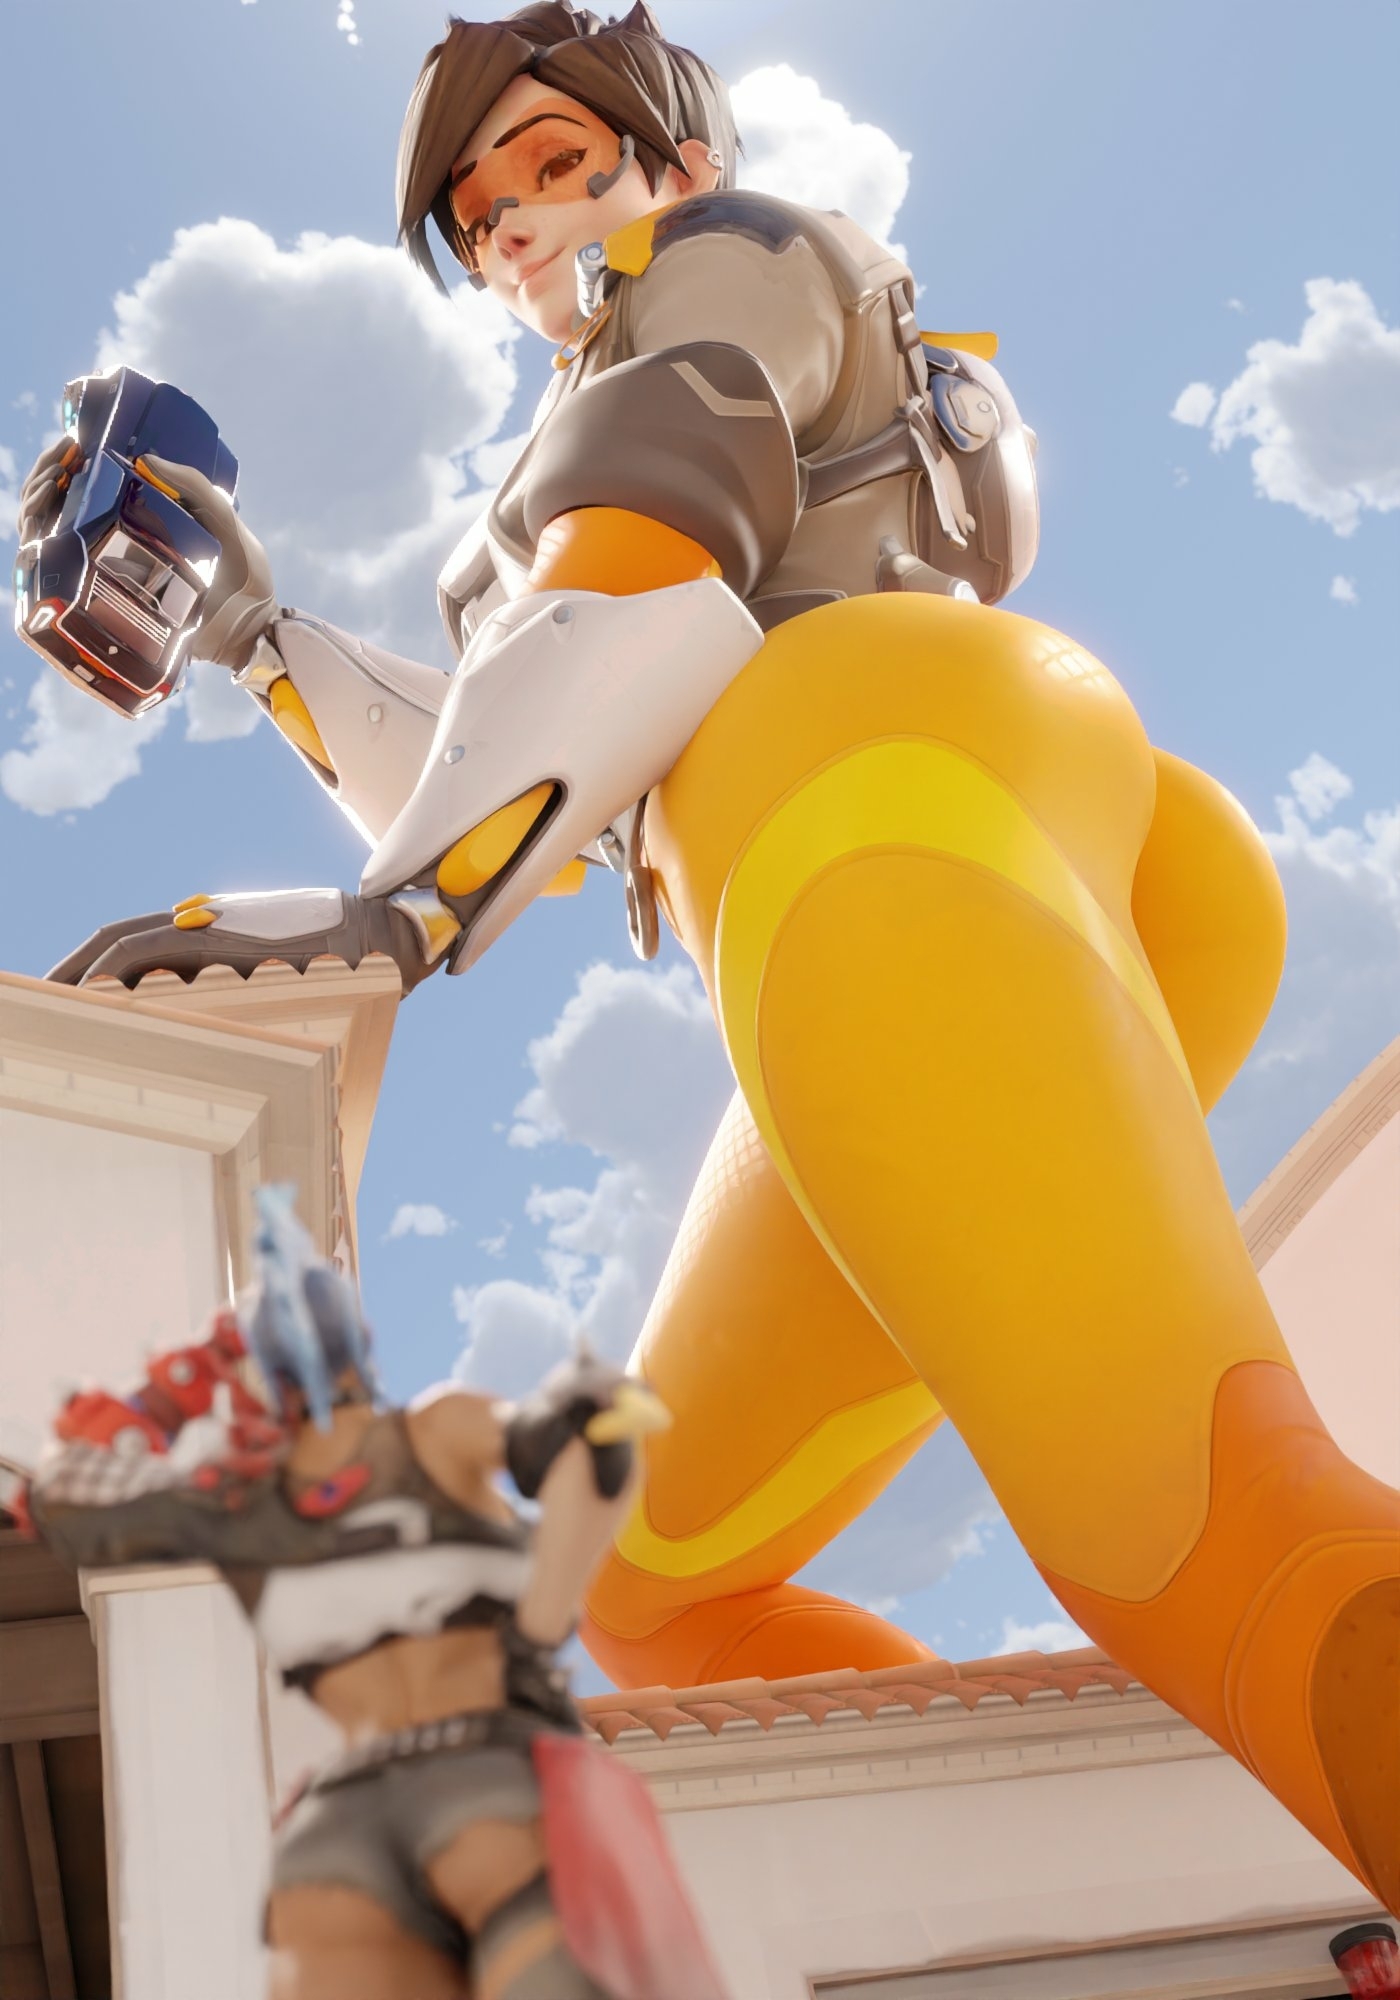 Backcapping changed since Overwatch 1 Junkerqueen Tracer Overwatch Boobs Big boobs Sexy Horny Face Big Ass Horny Giantess 3d Porn